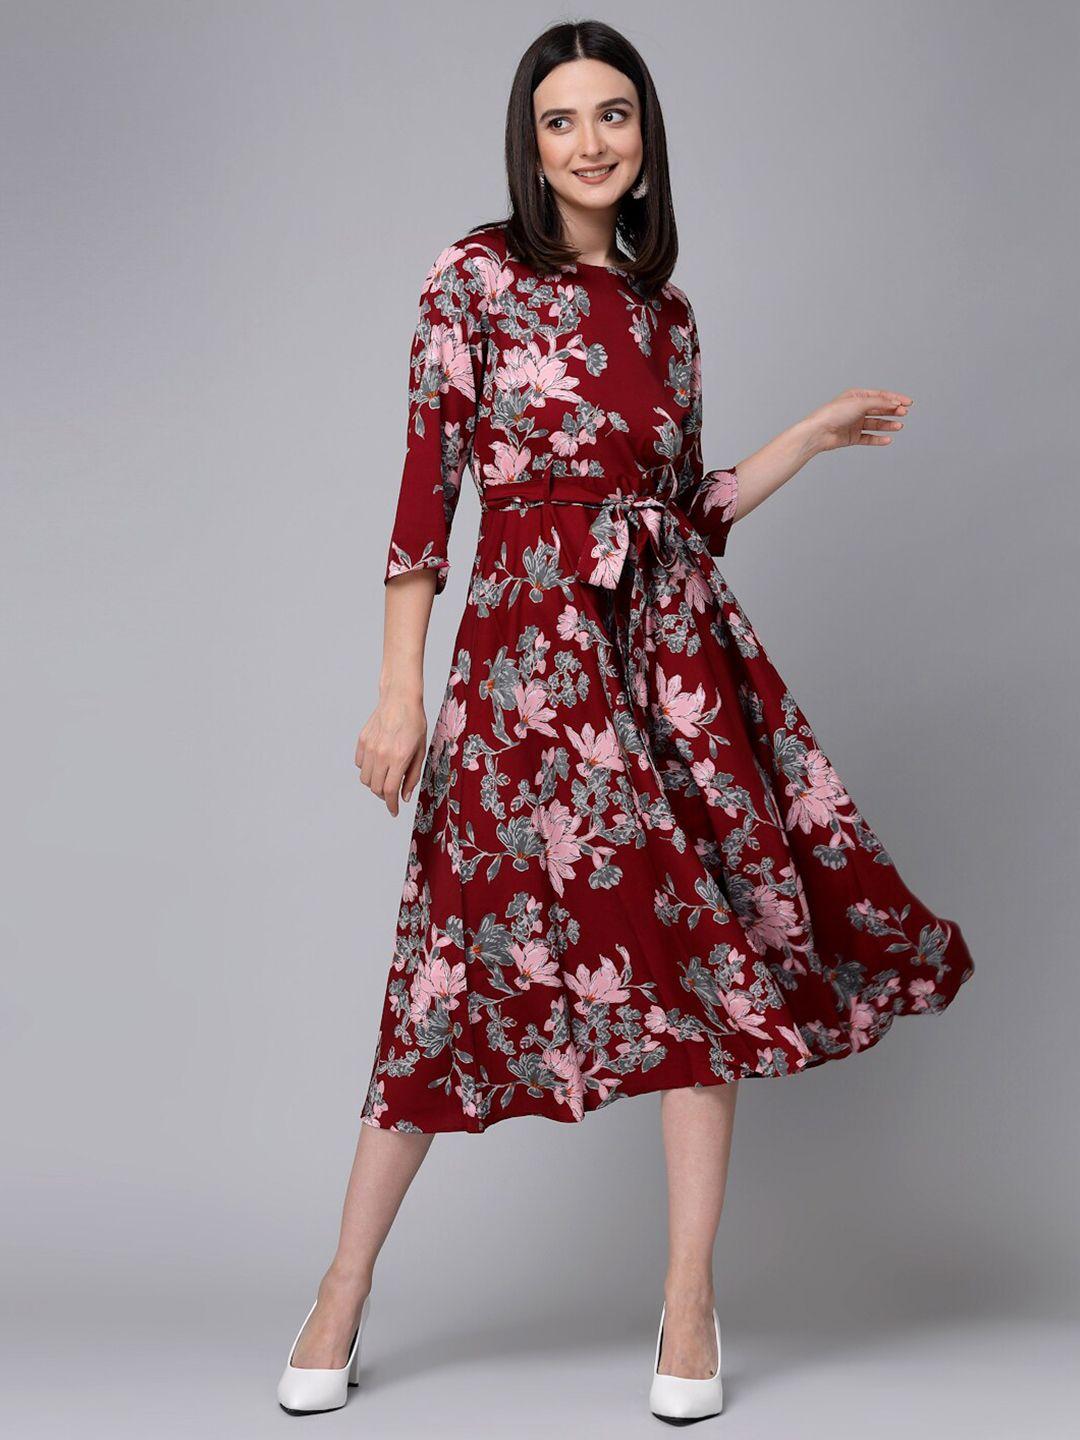 style quotient maroon floral printed a-line midi dress with belt